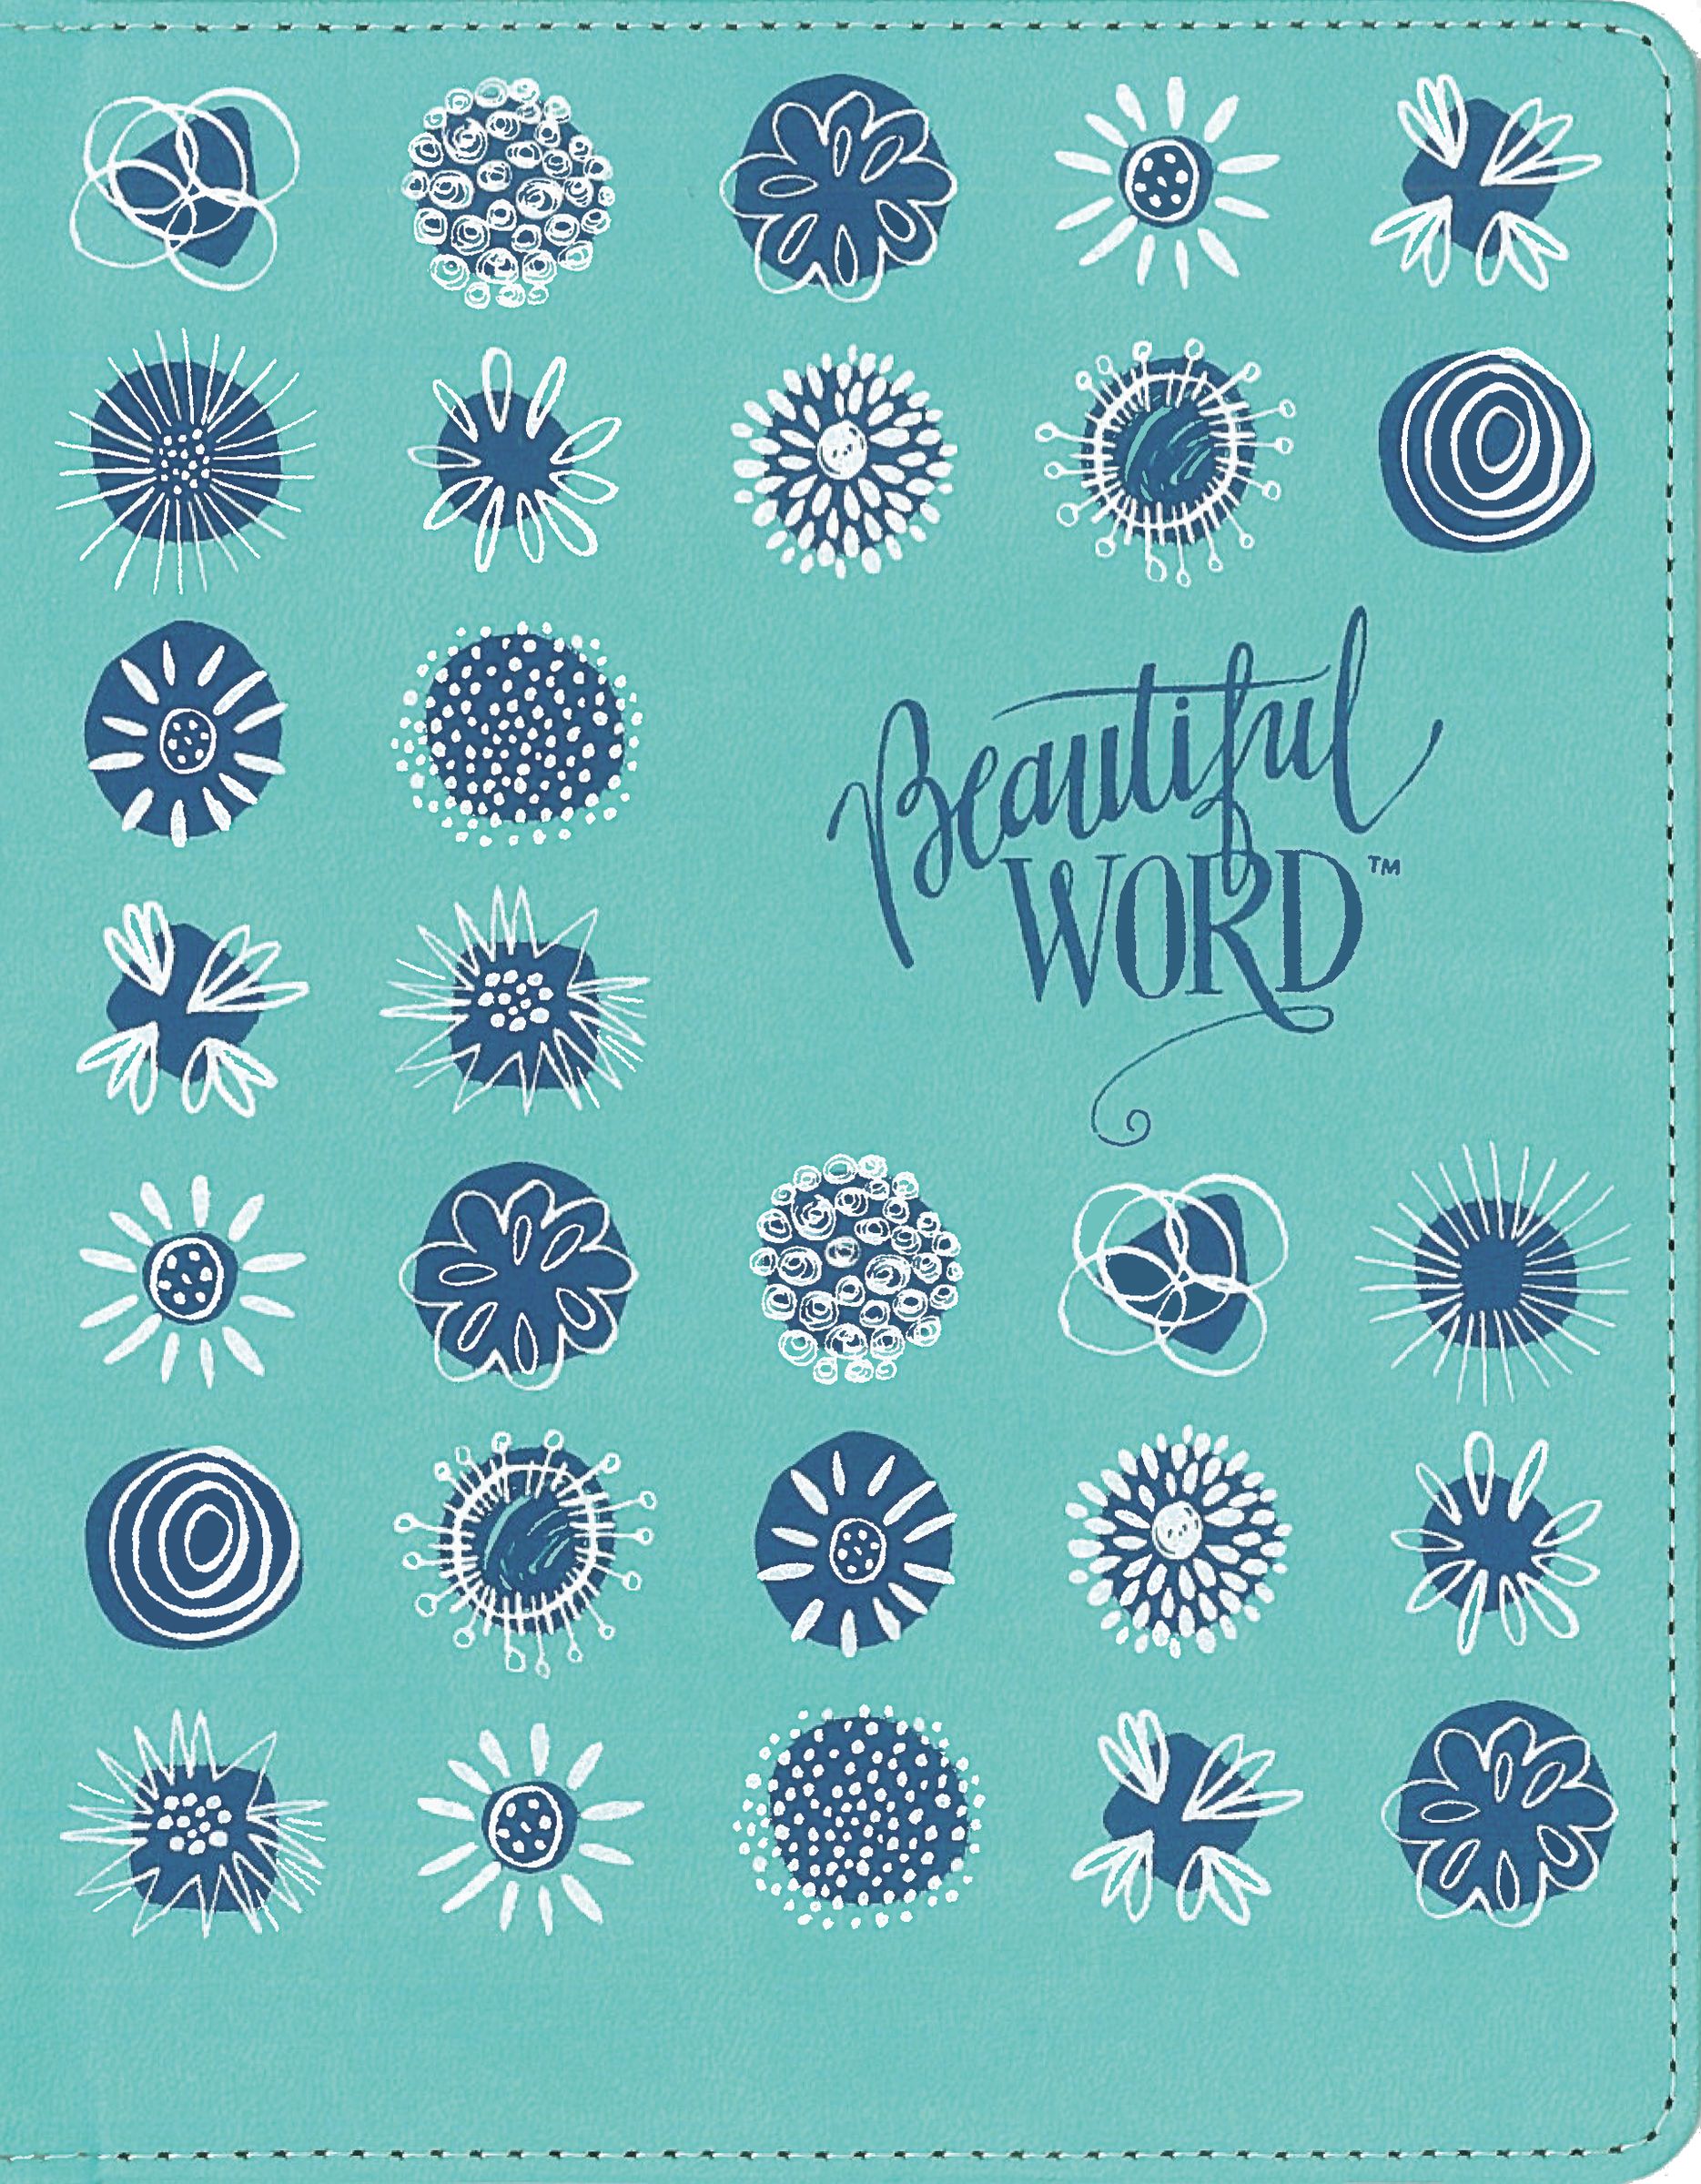 NIV Beautiful Word Coloring Bible for Girls Pencil/Sticker Gift Set, Updated, Leathersoft Over Board, Comfort Print: 600+ Verses to Color [Book]